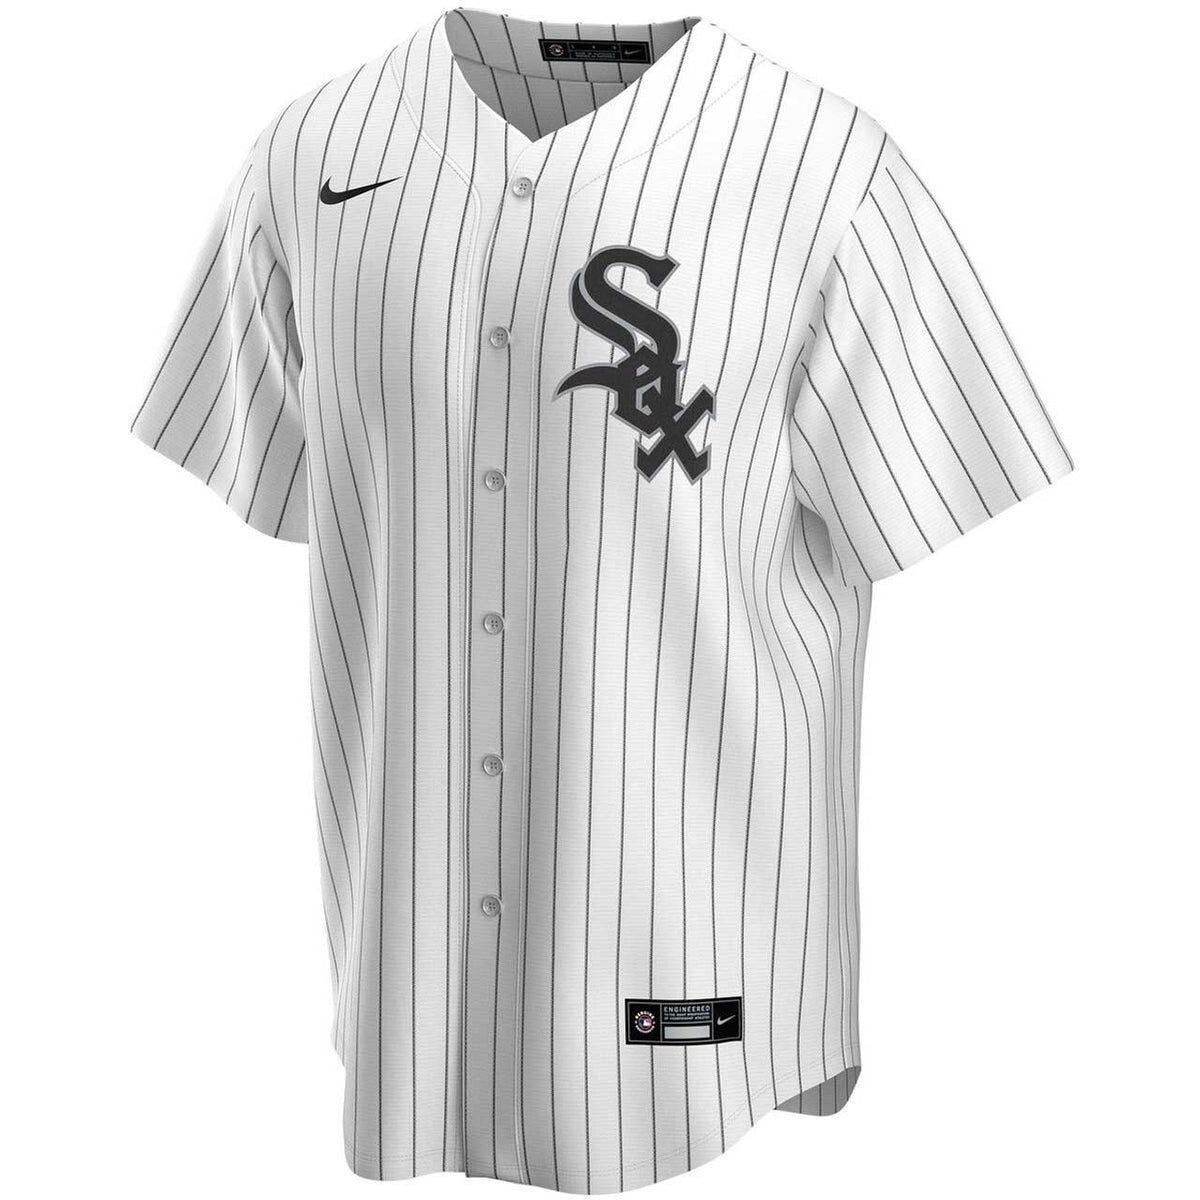 Frank Thomas 2005 Chicago White Sox Authentic On-Field World Series Home  Jersey